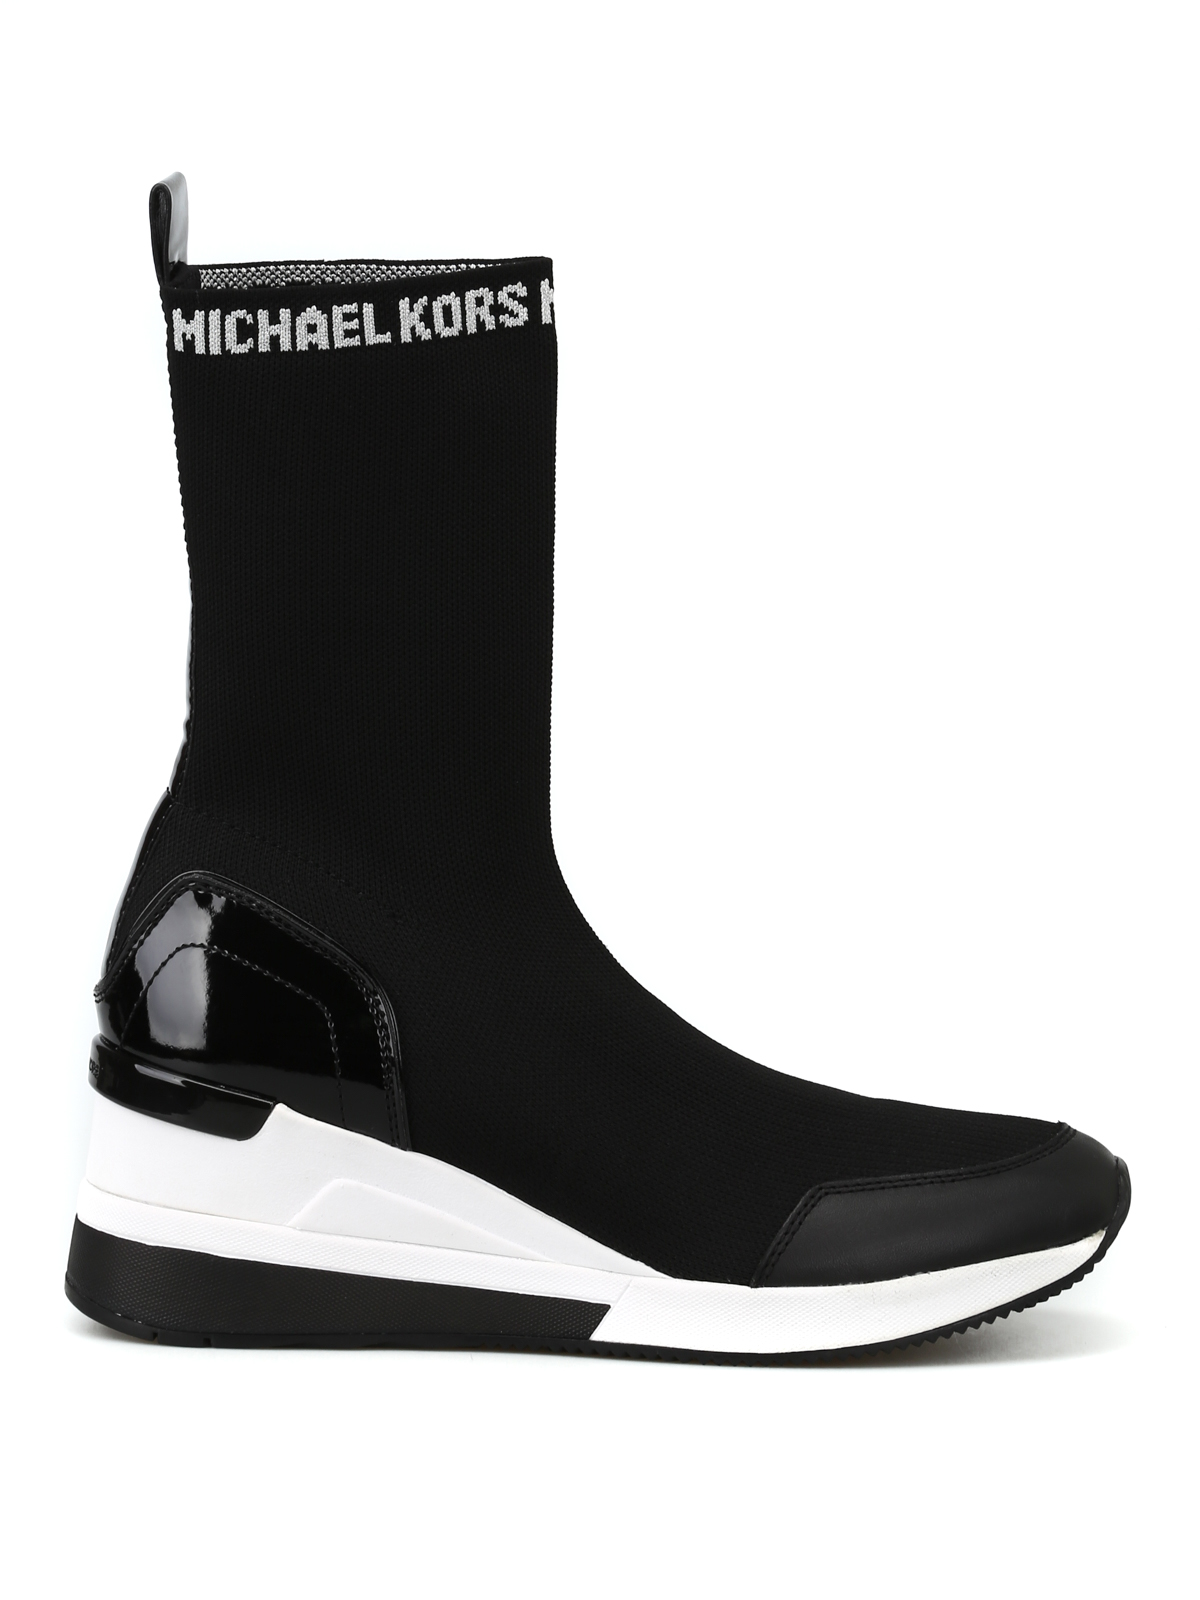 Michael Kors - Grover Knit boot style 